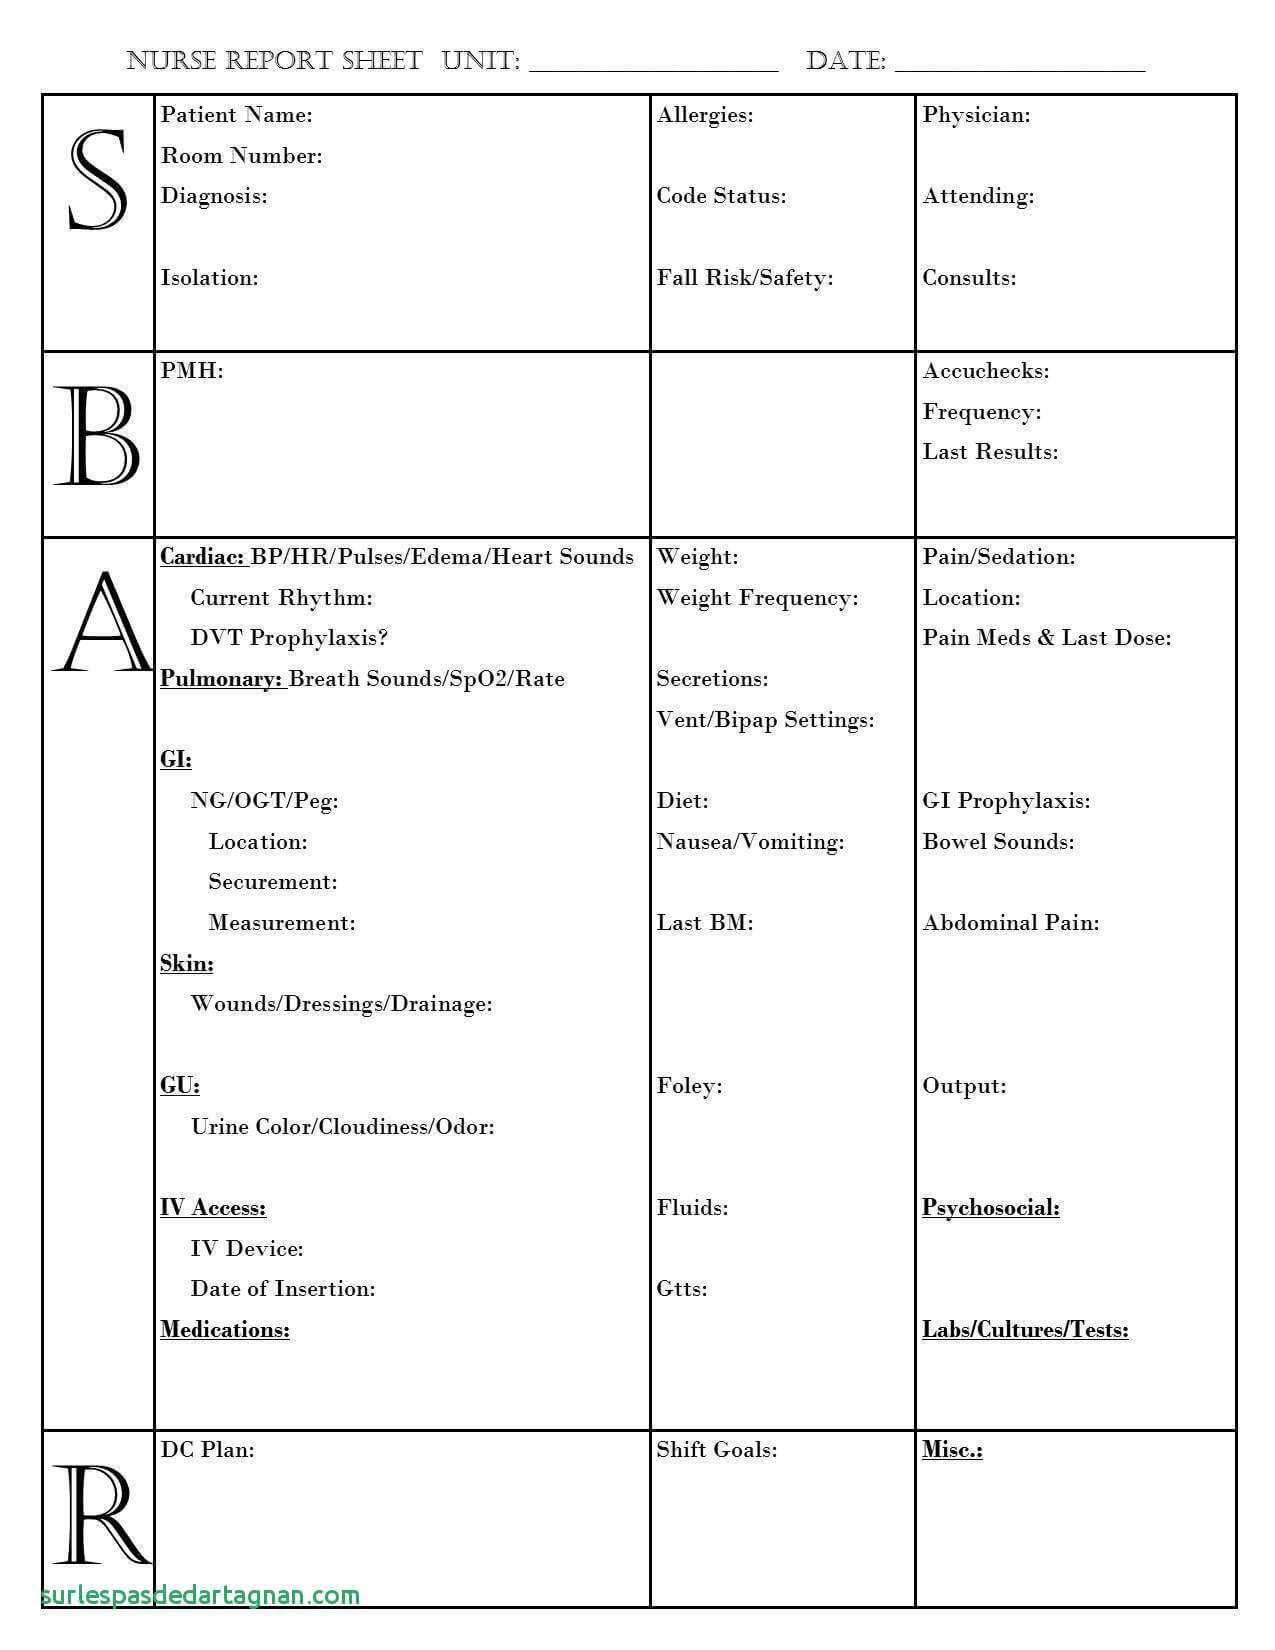 Nursing Report Sheet Template Together With Sbar Nurse Within Med Surg Report Sheet Templates